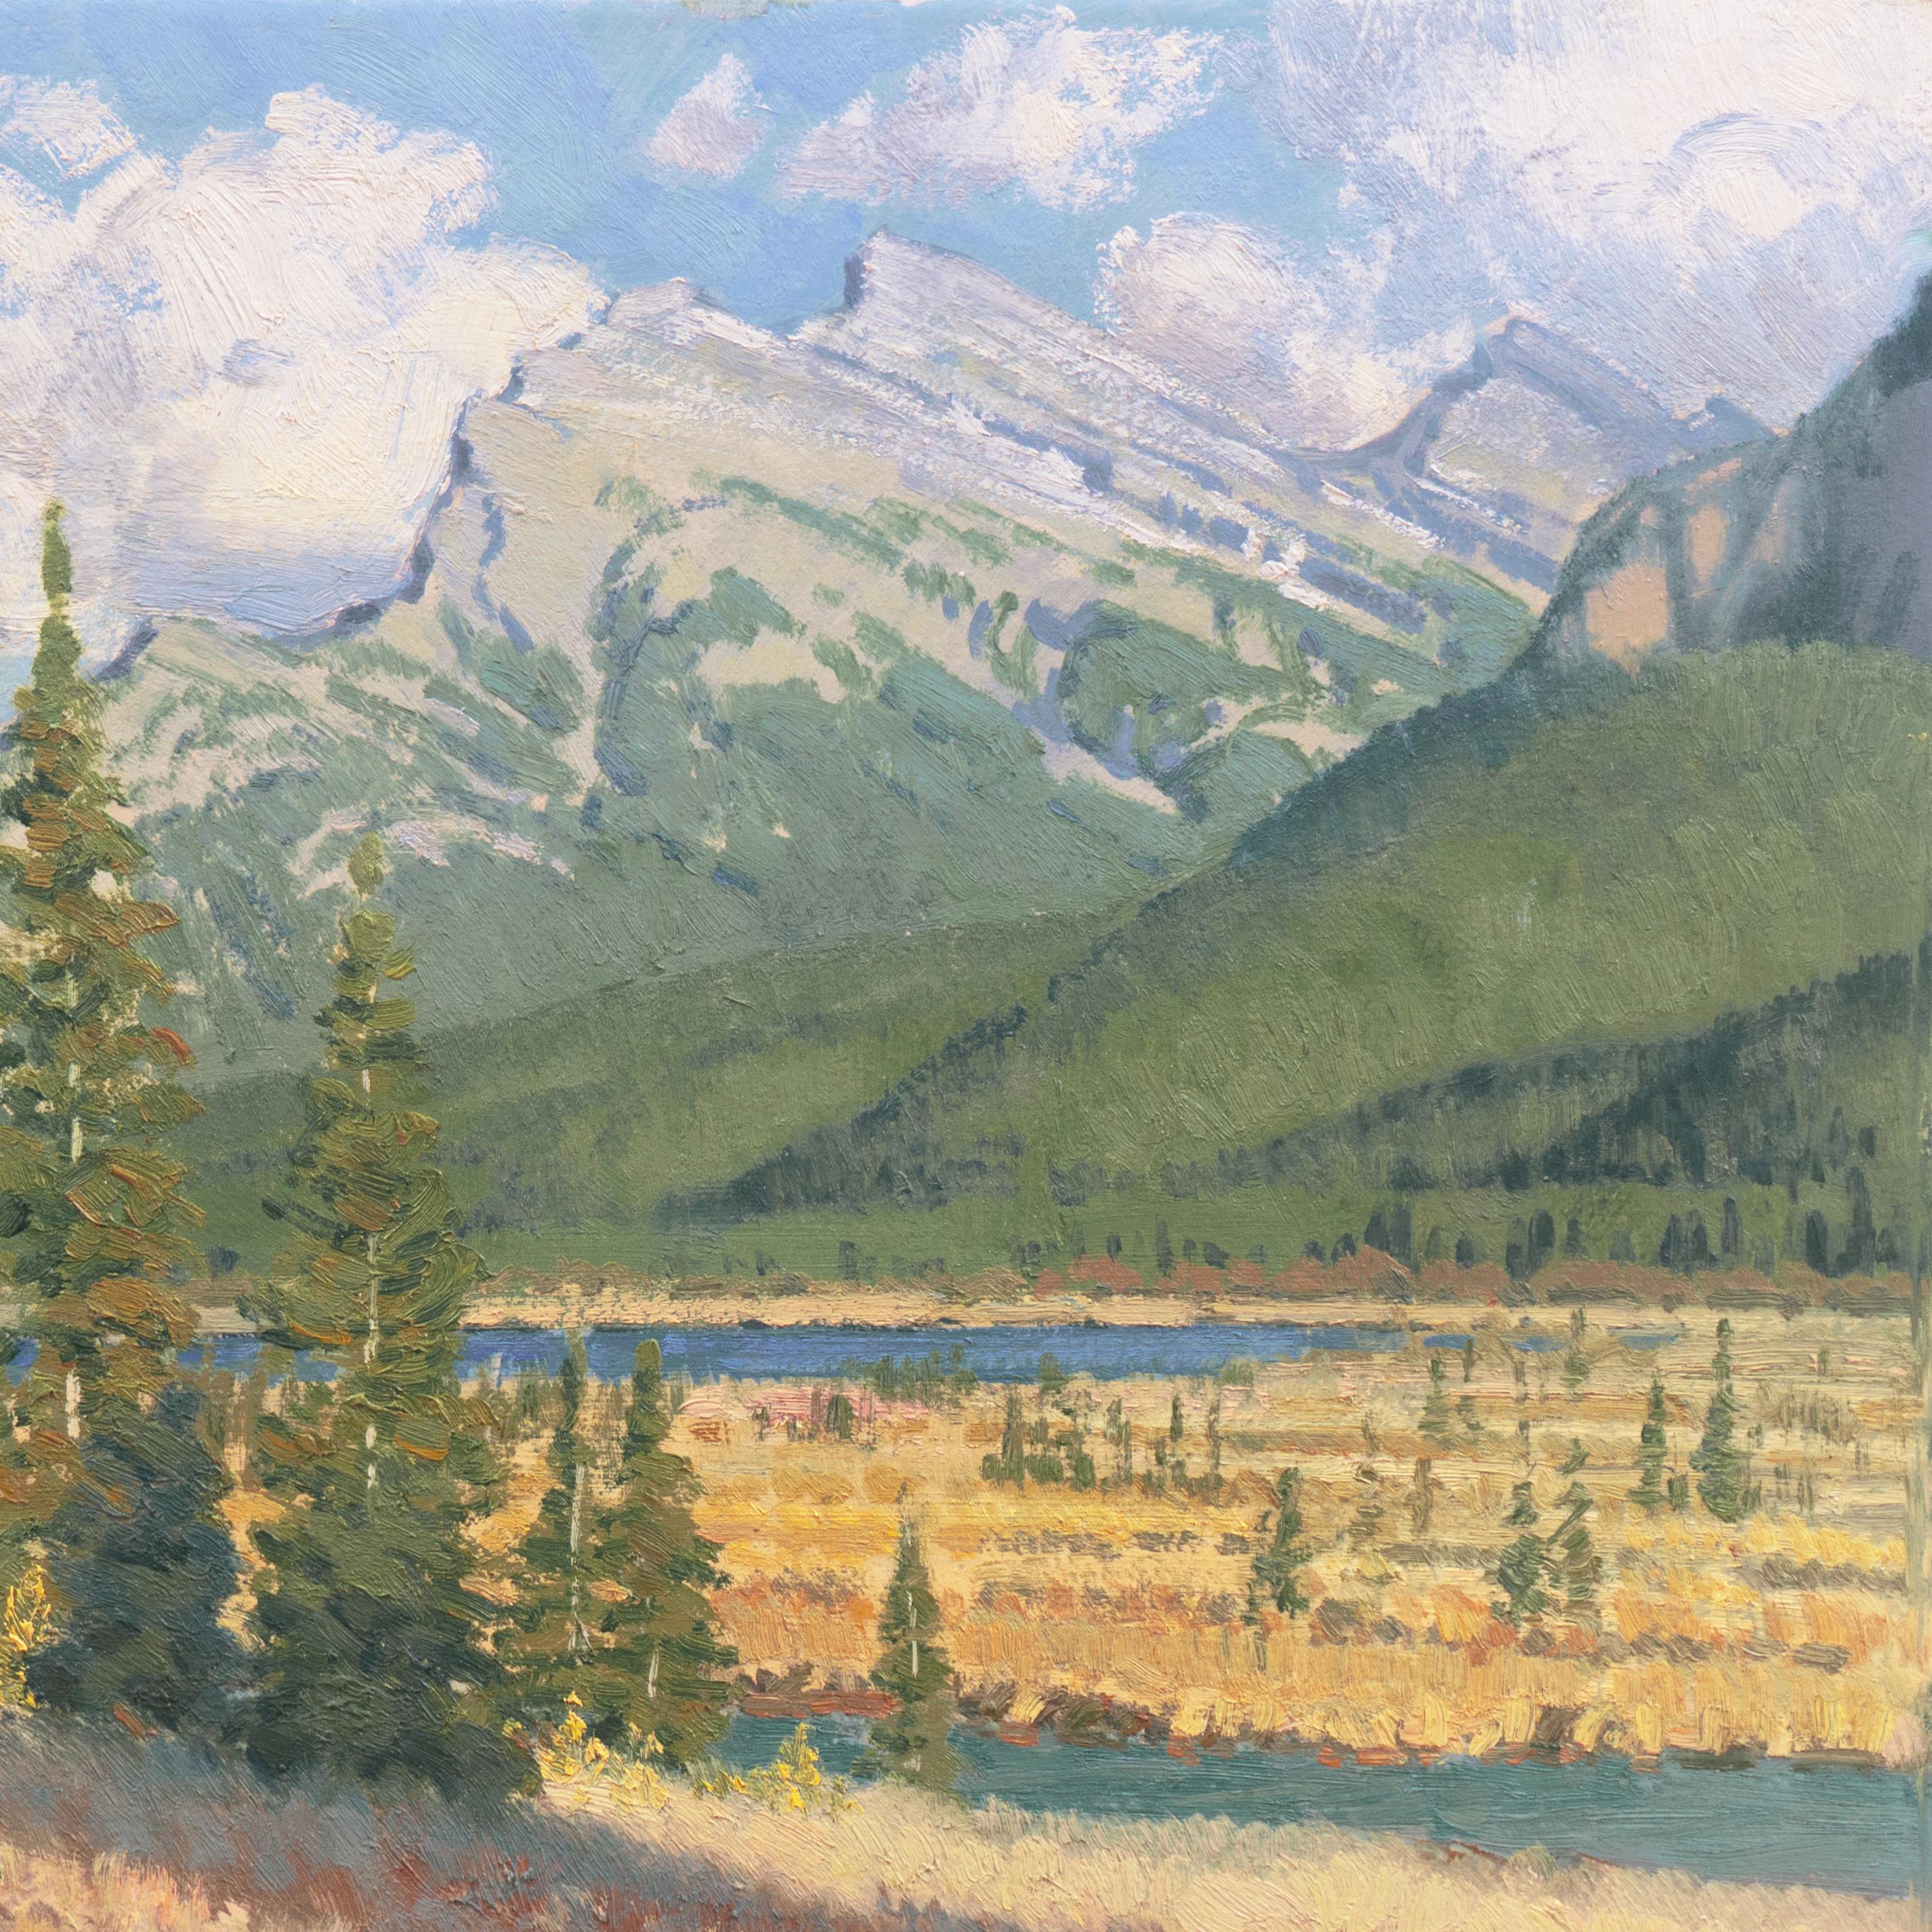 Signed lower right, 'Wayne E Wolfe' (American, born 1945), dated 1979 and titled verso, 'Mt. Rund'. 
Framed dimensions: 20 x 2 x 22.75 inches

A mountain landscape showing a view of the Vermilion lakes before Mt. Rundle in the Canadian Rockies.